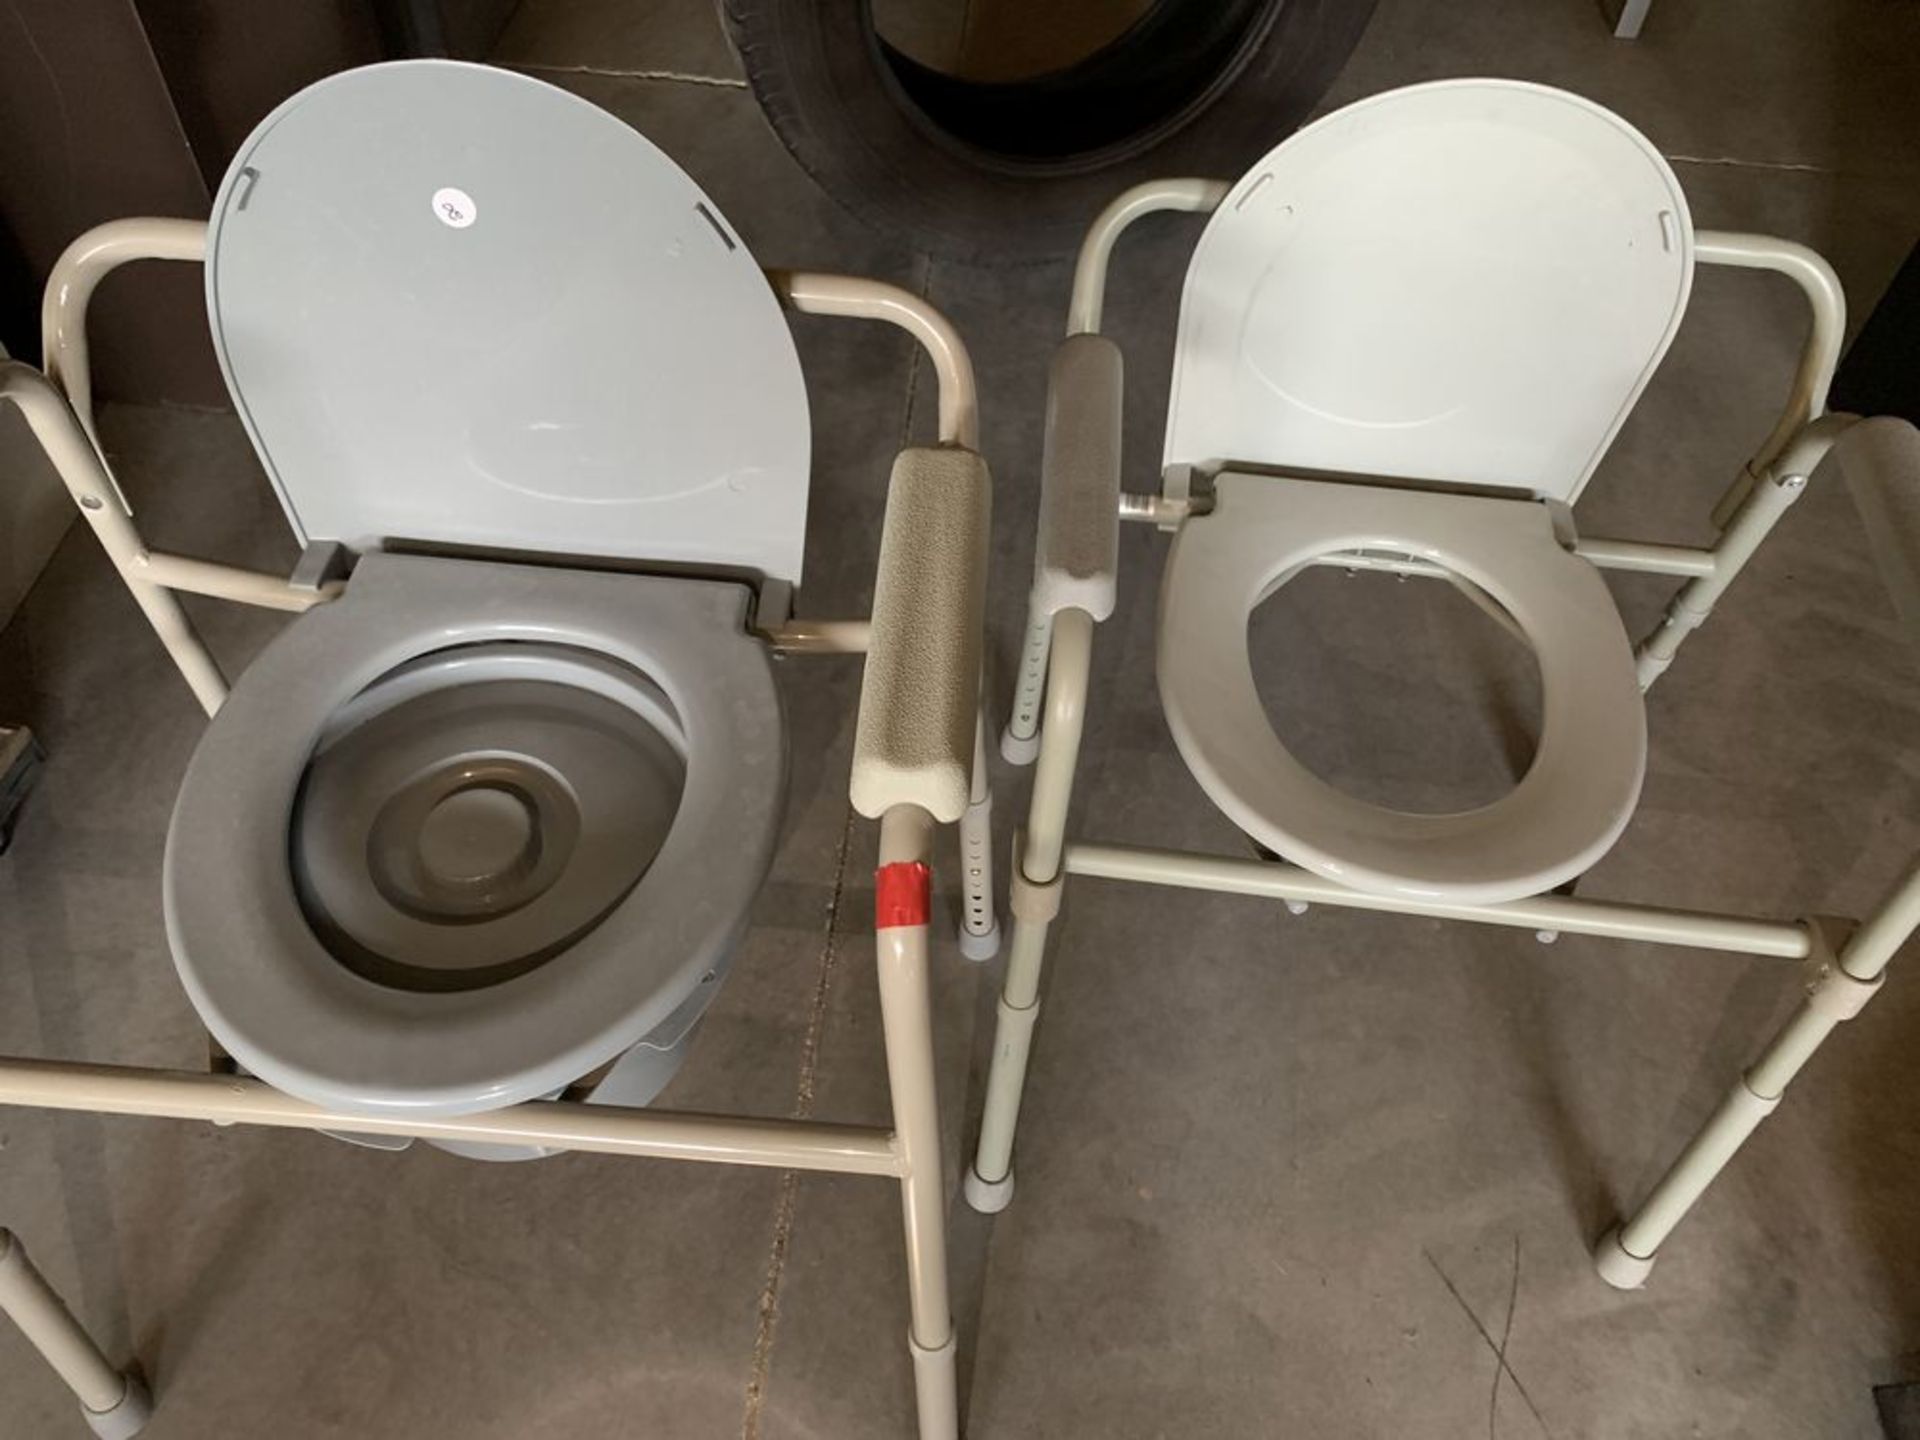 2 Toilet Assistance Seats with Handles - Image 3 of 4